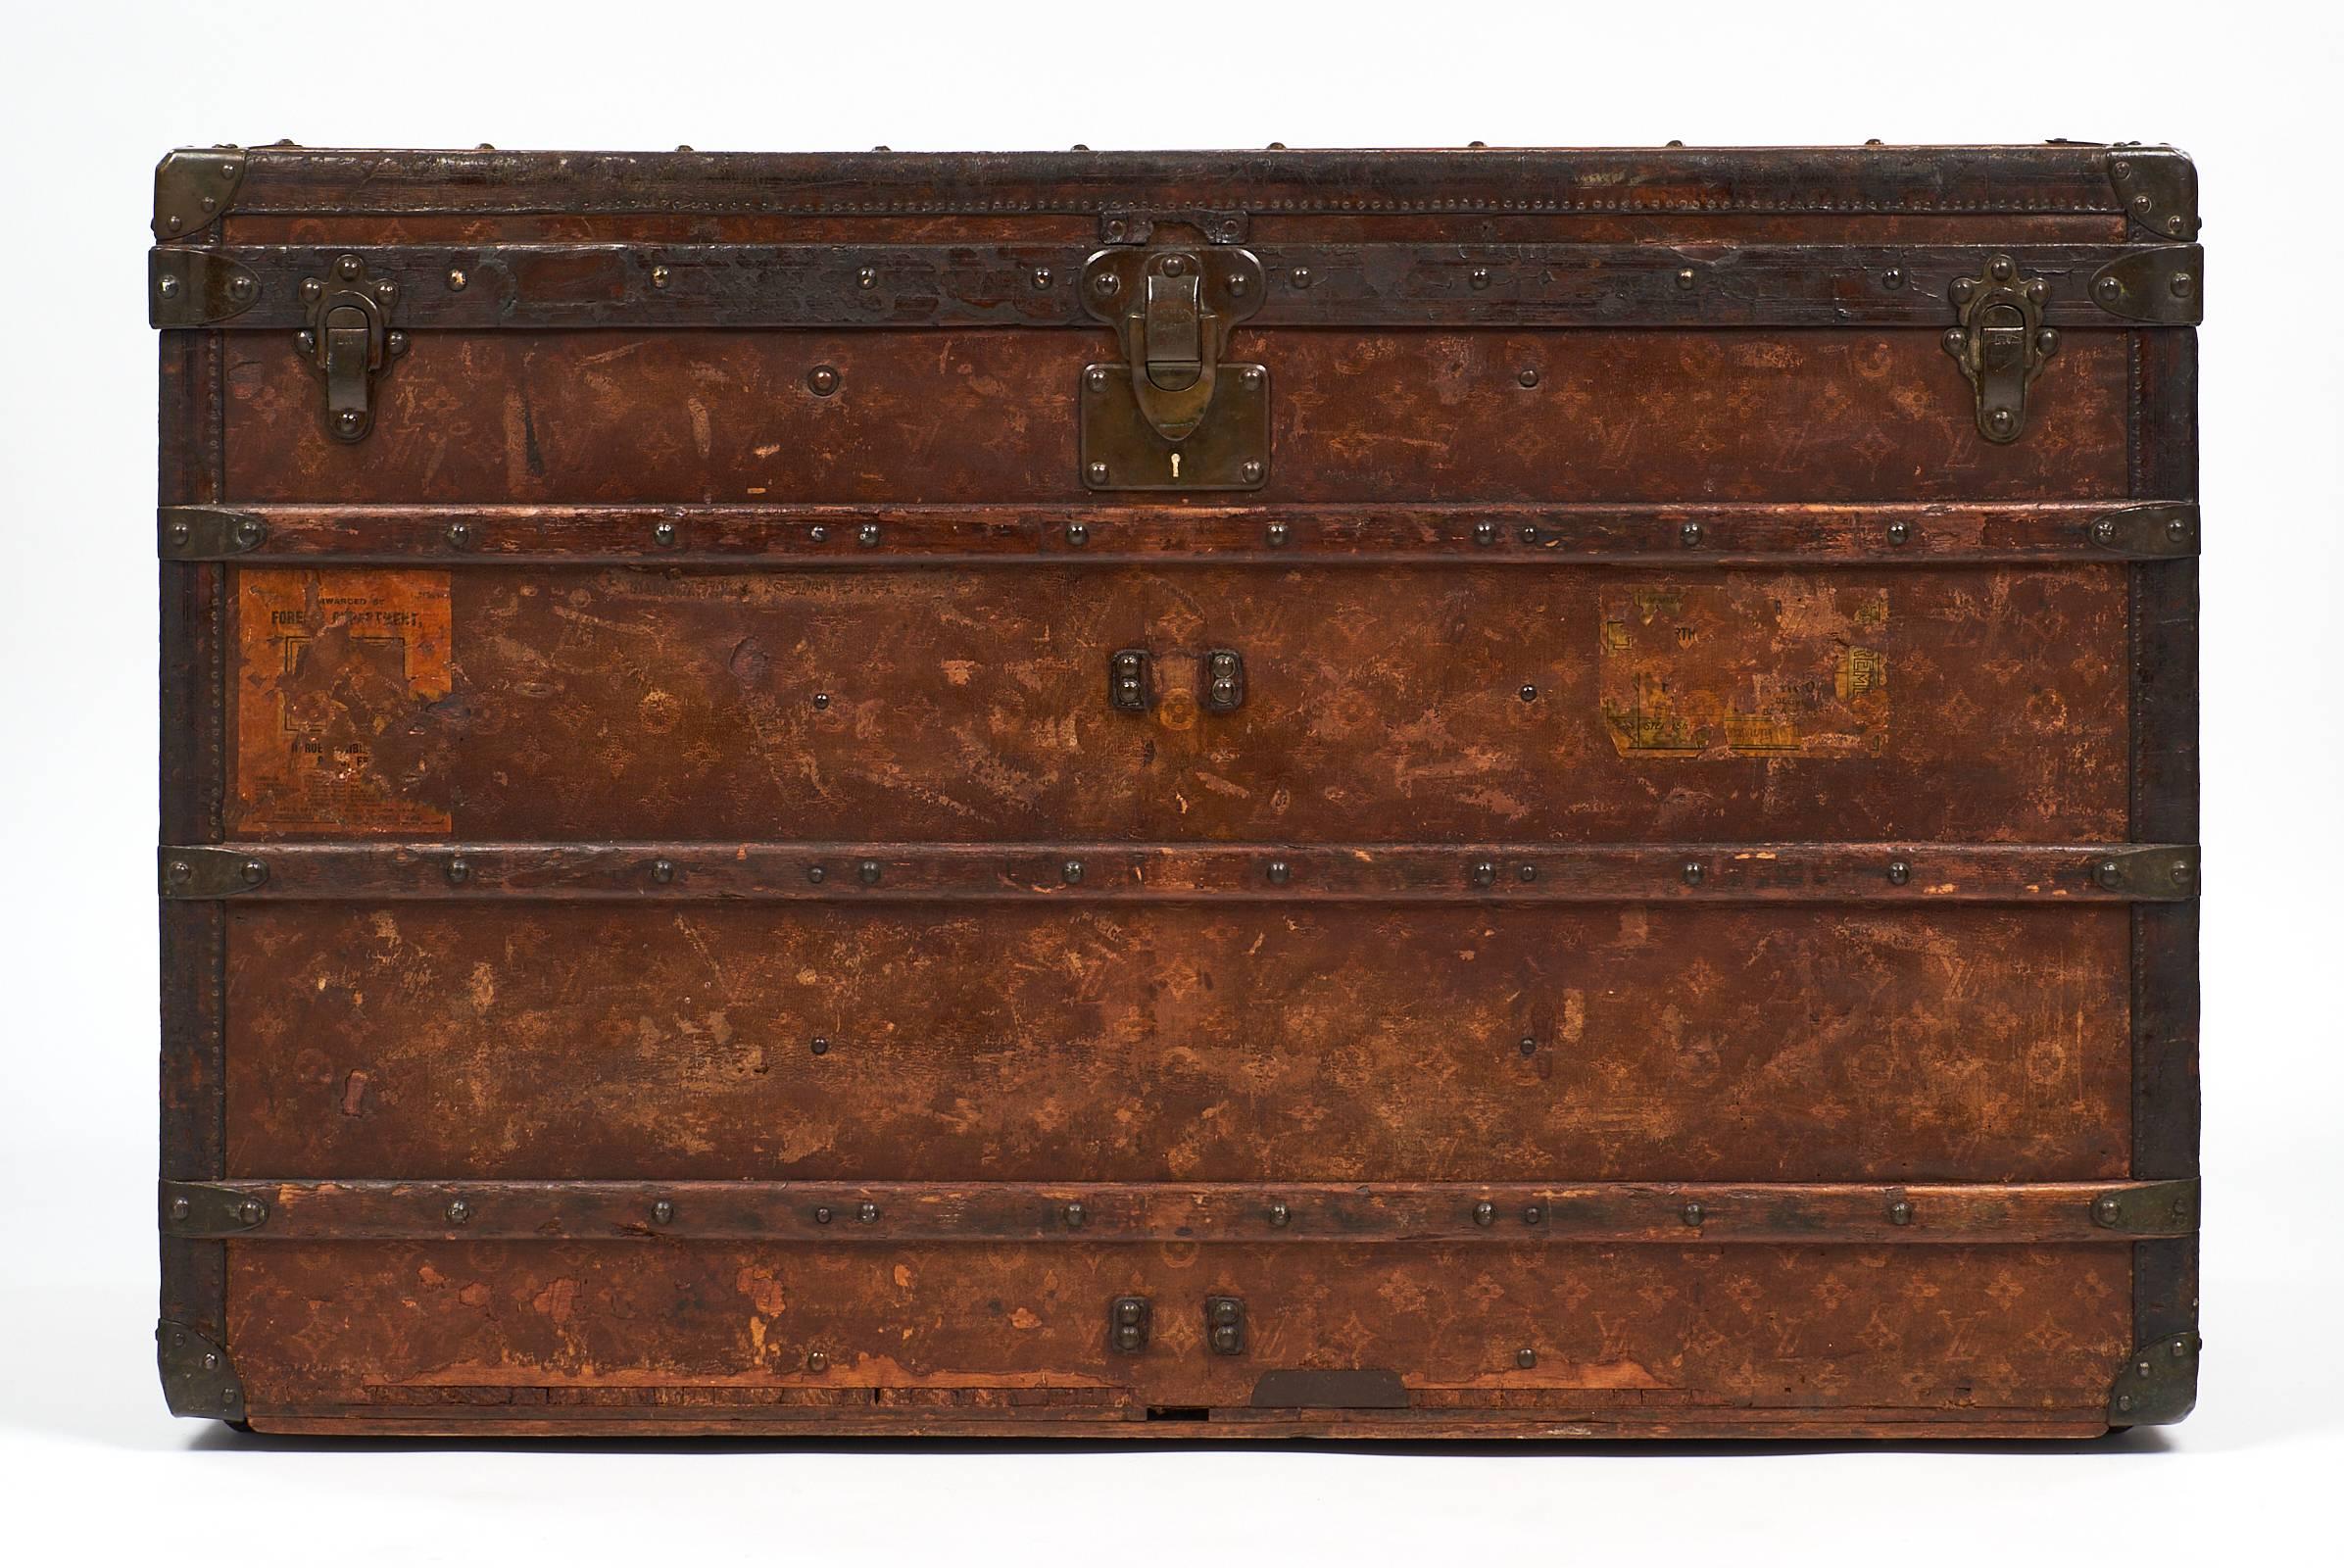 19th century steamer trunk by Louis Vuitton with stunning patina from age on the original leather canvas. This piece features Louis Vuitton monograms and 1st class shipping labels on the exterior, and wonderful details such as L.V. inscriptions on